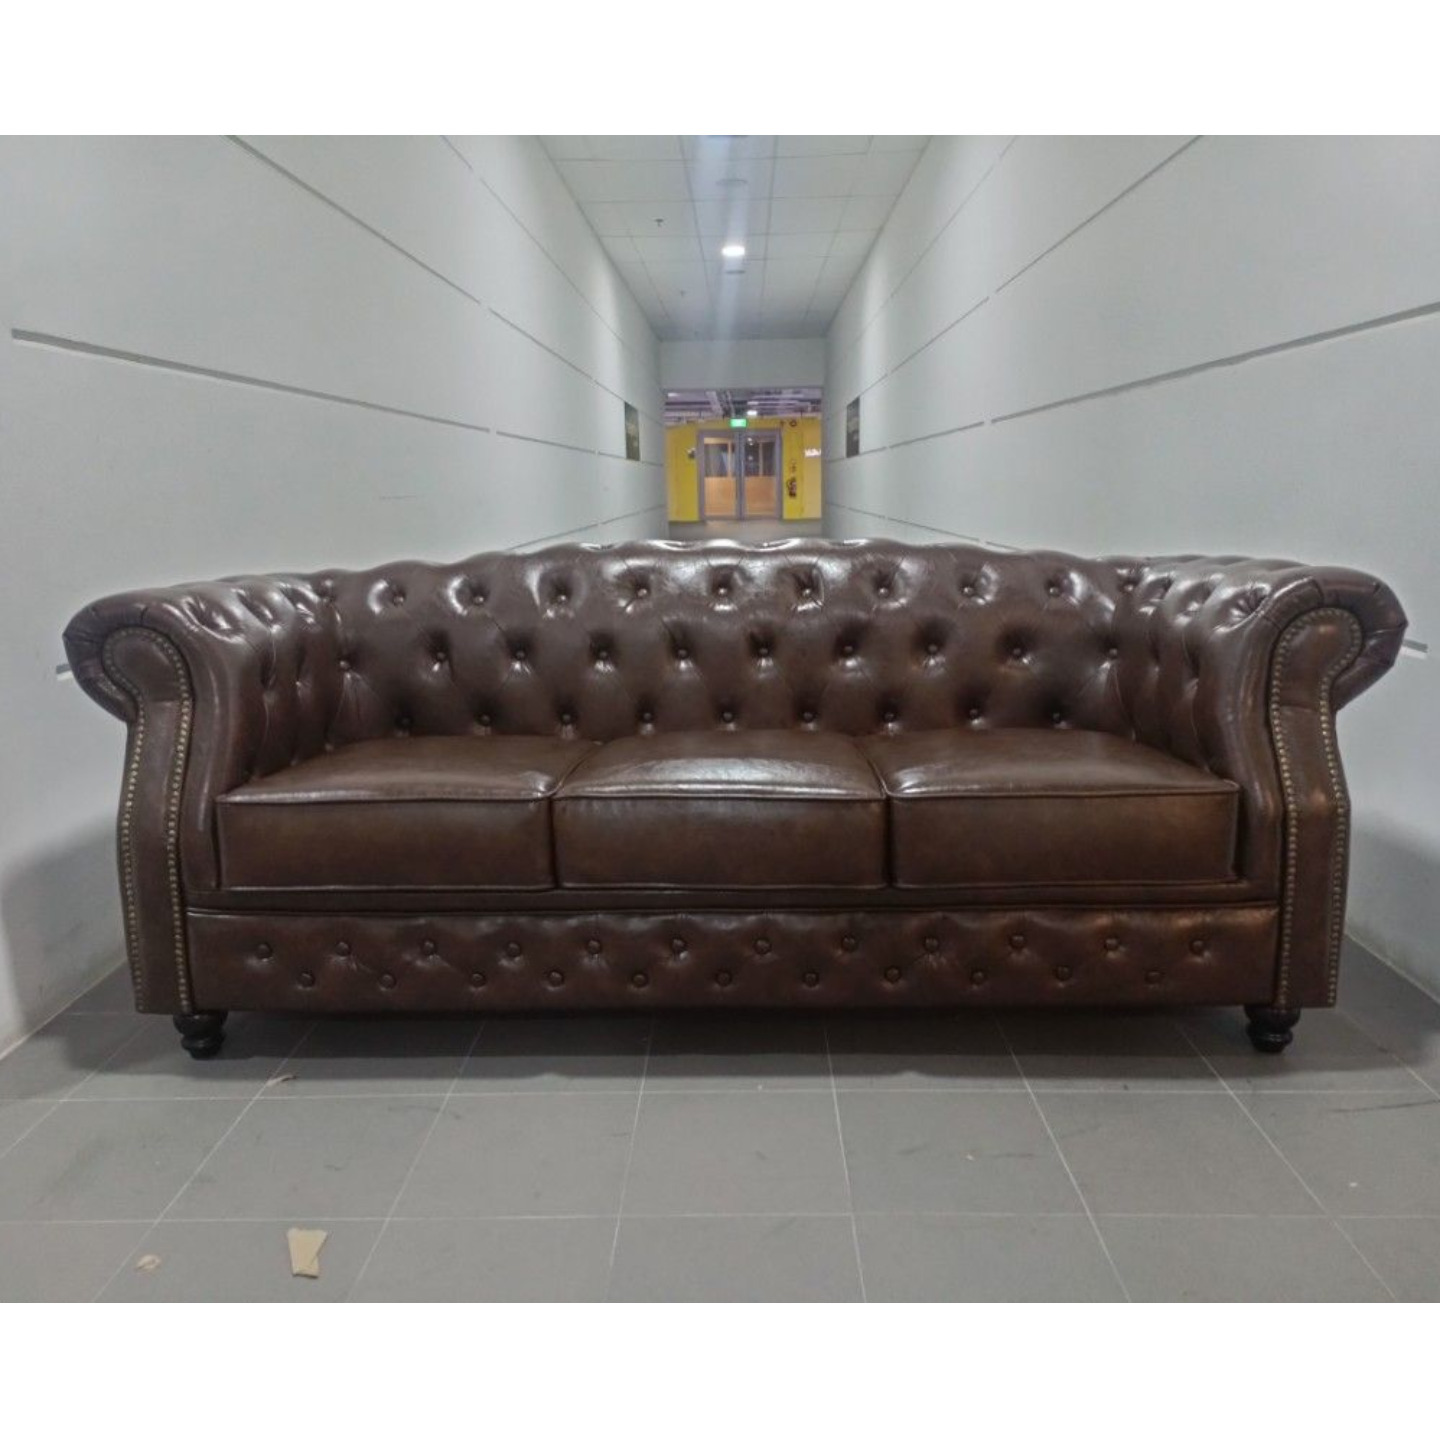 (PRE ORDER) BOTTEVA 3 Seater Chesterfield Sofa in DARK COCO PU - Estimated Delivery by July 2023